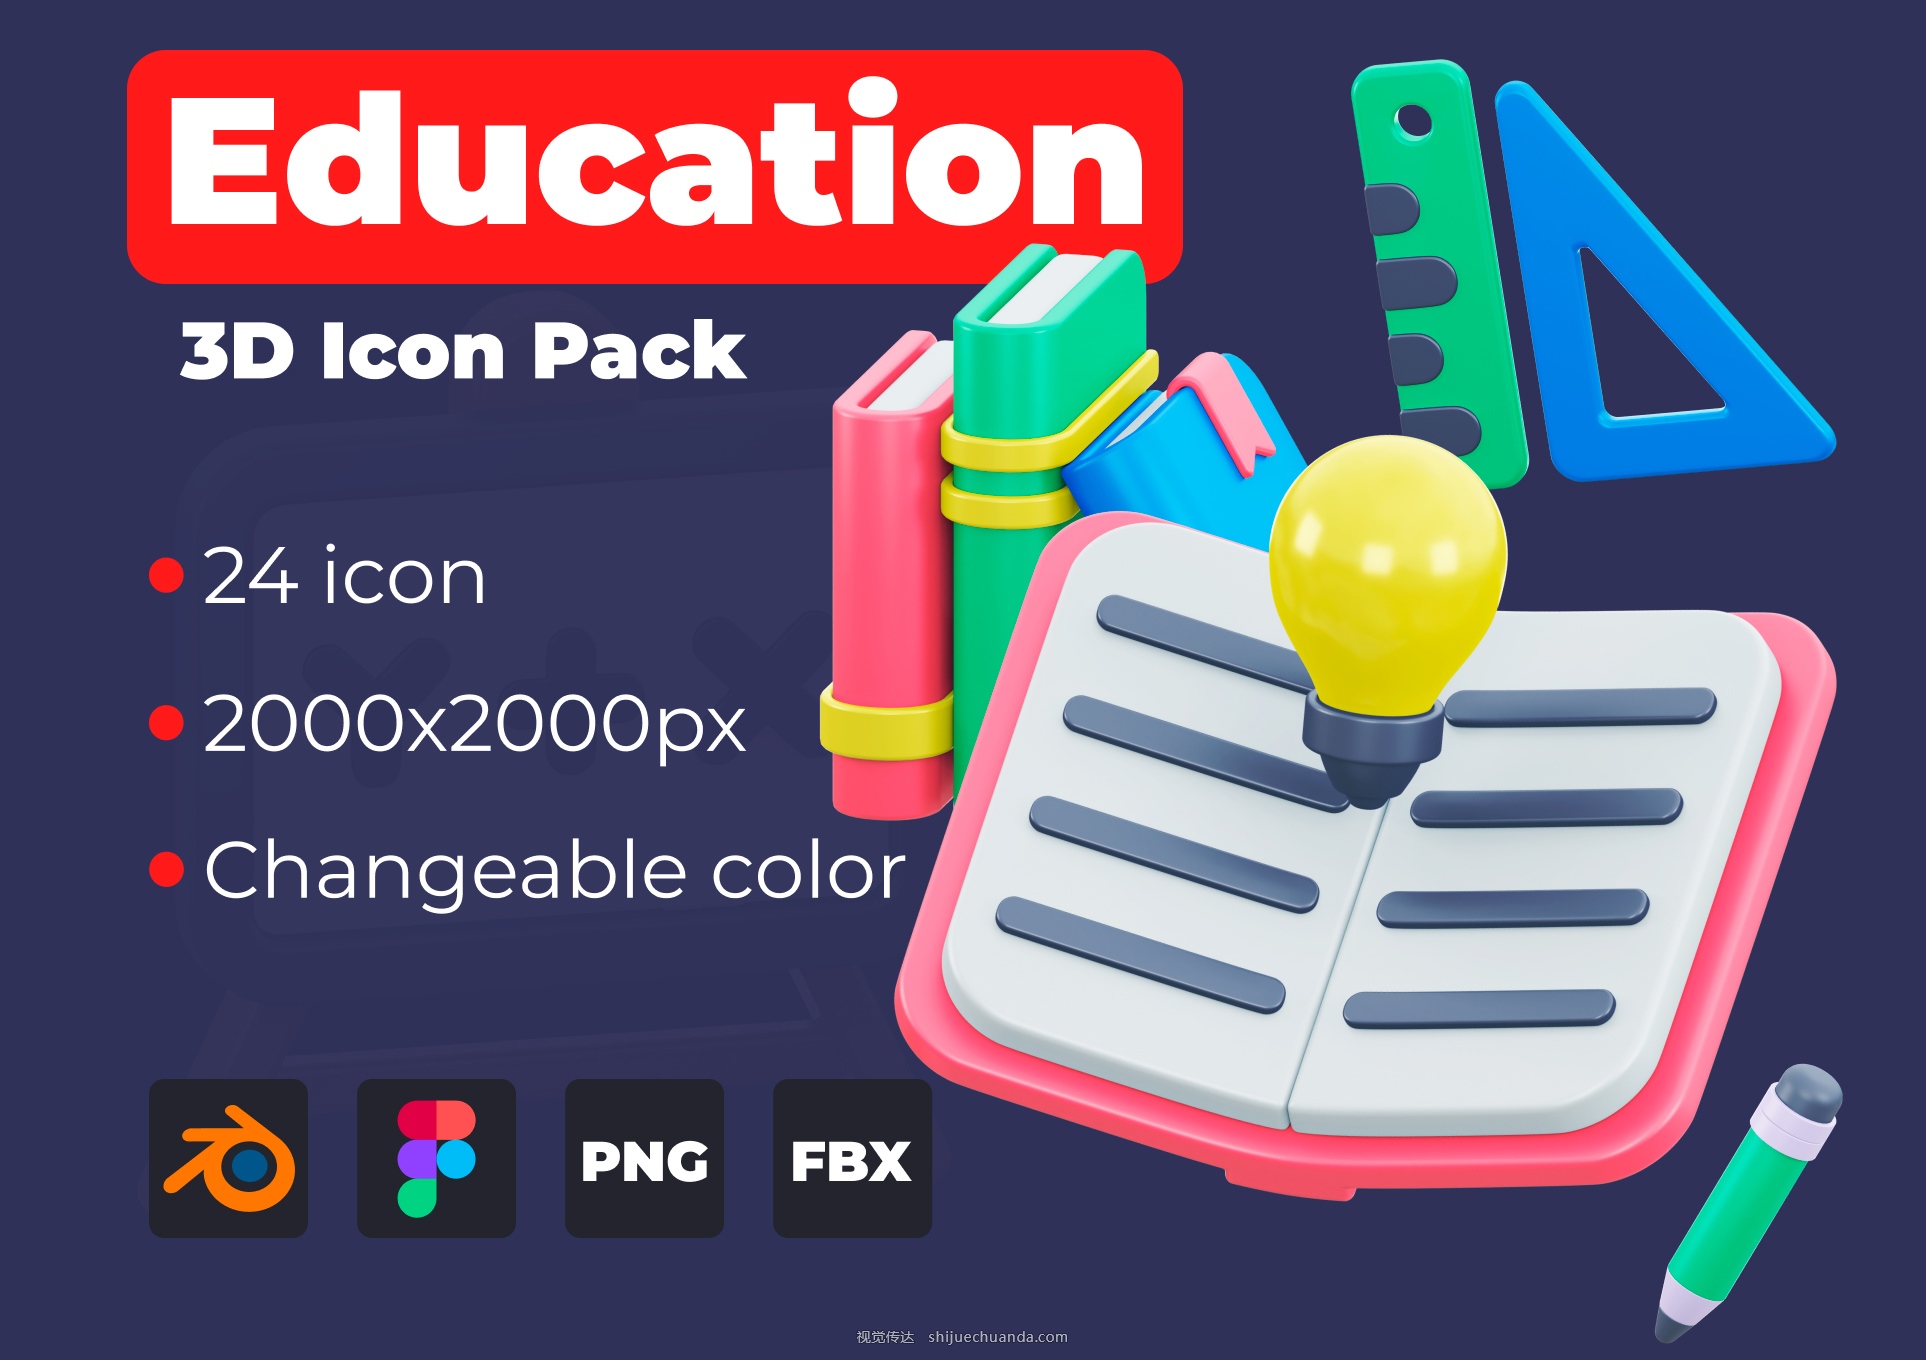 Education 3D icon pack.jpg